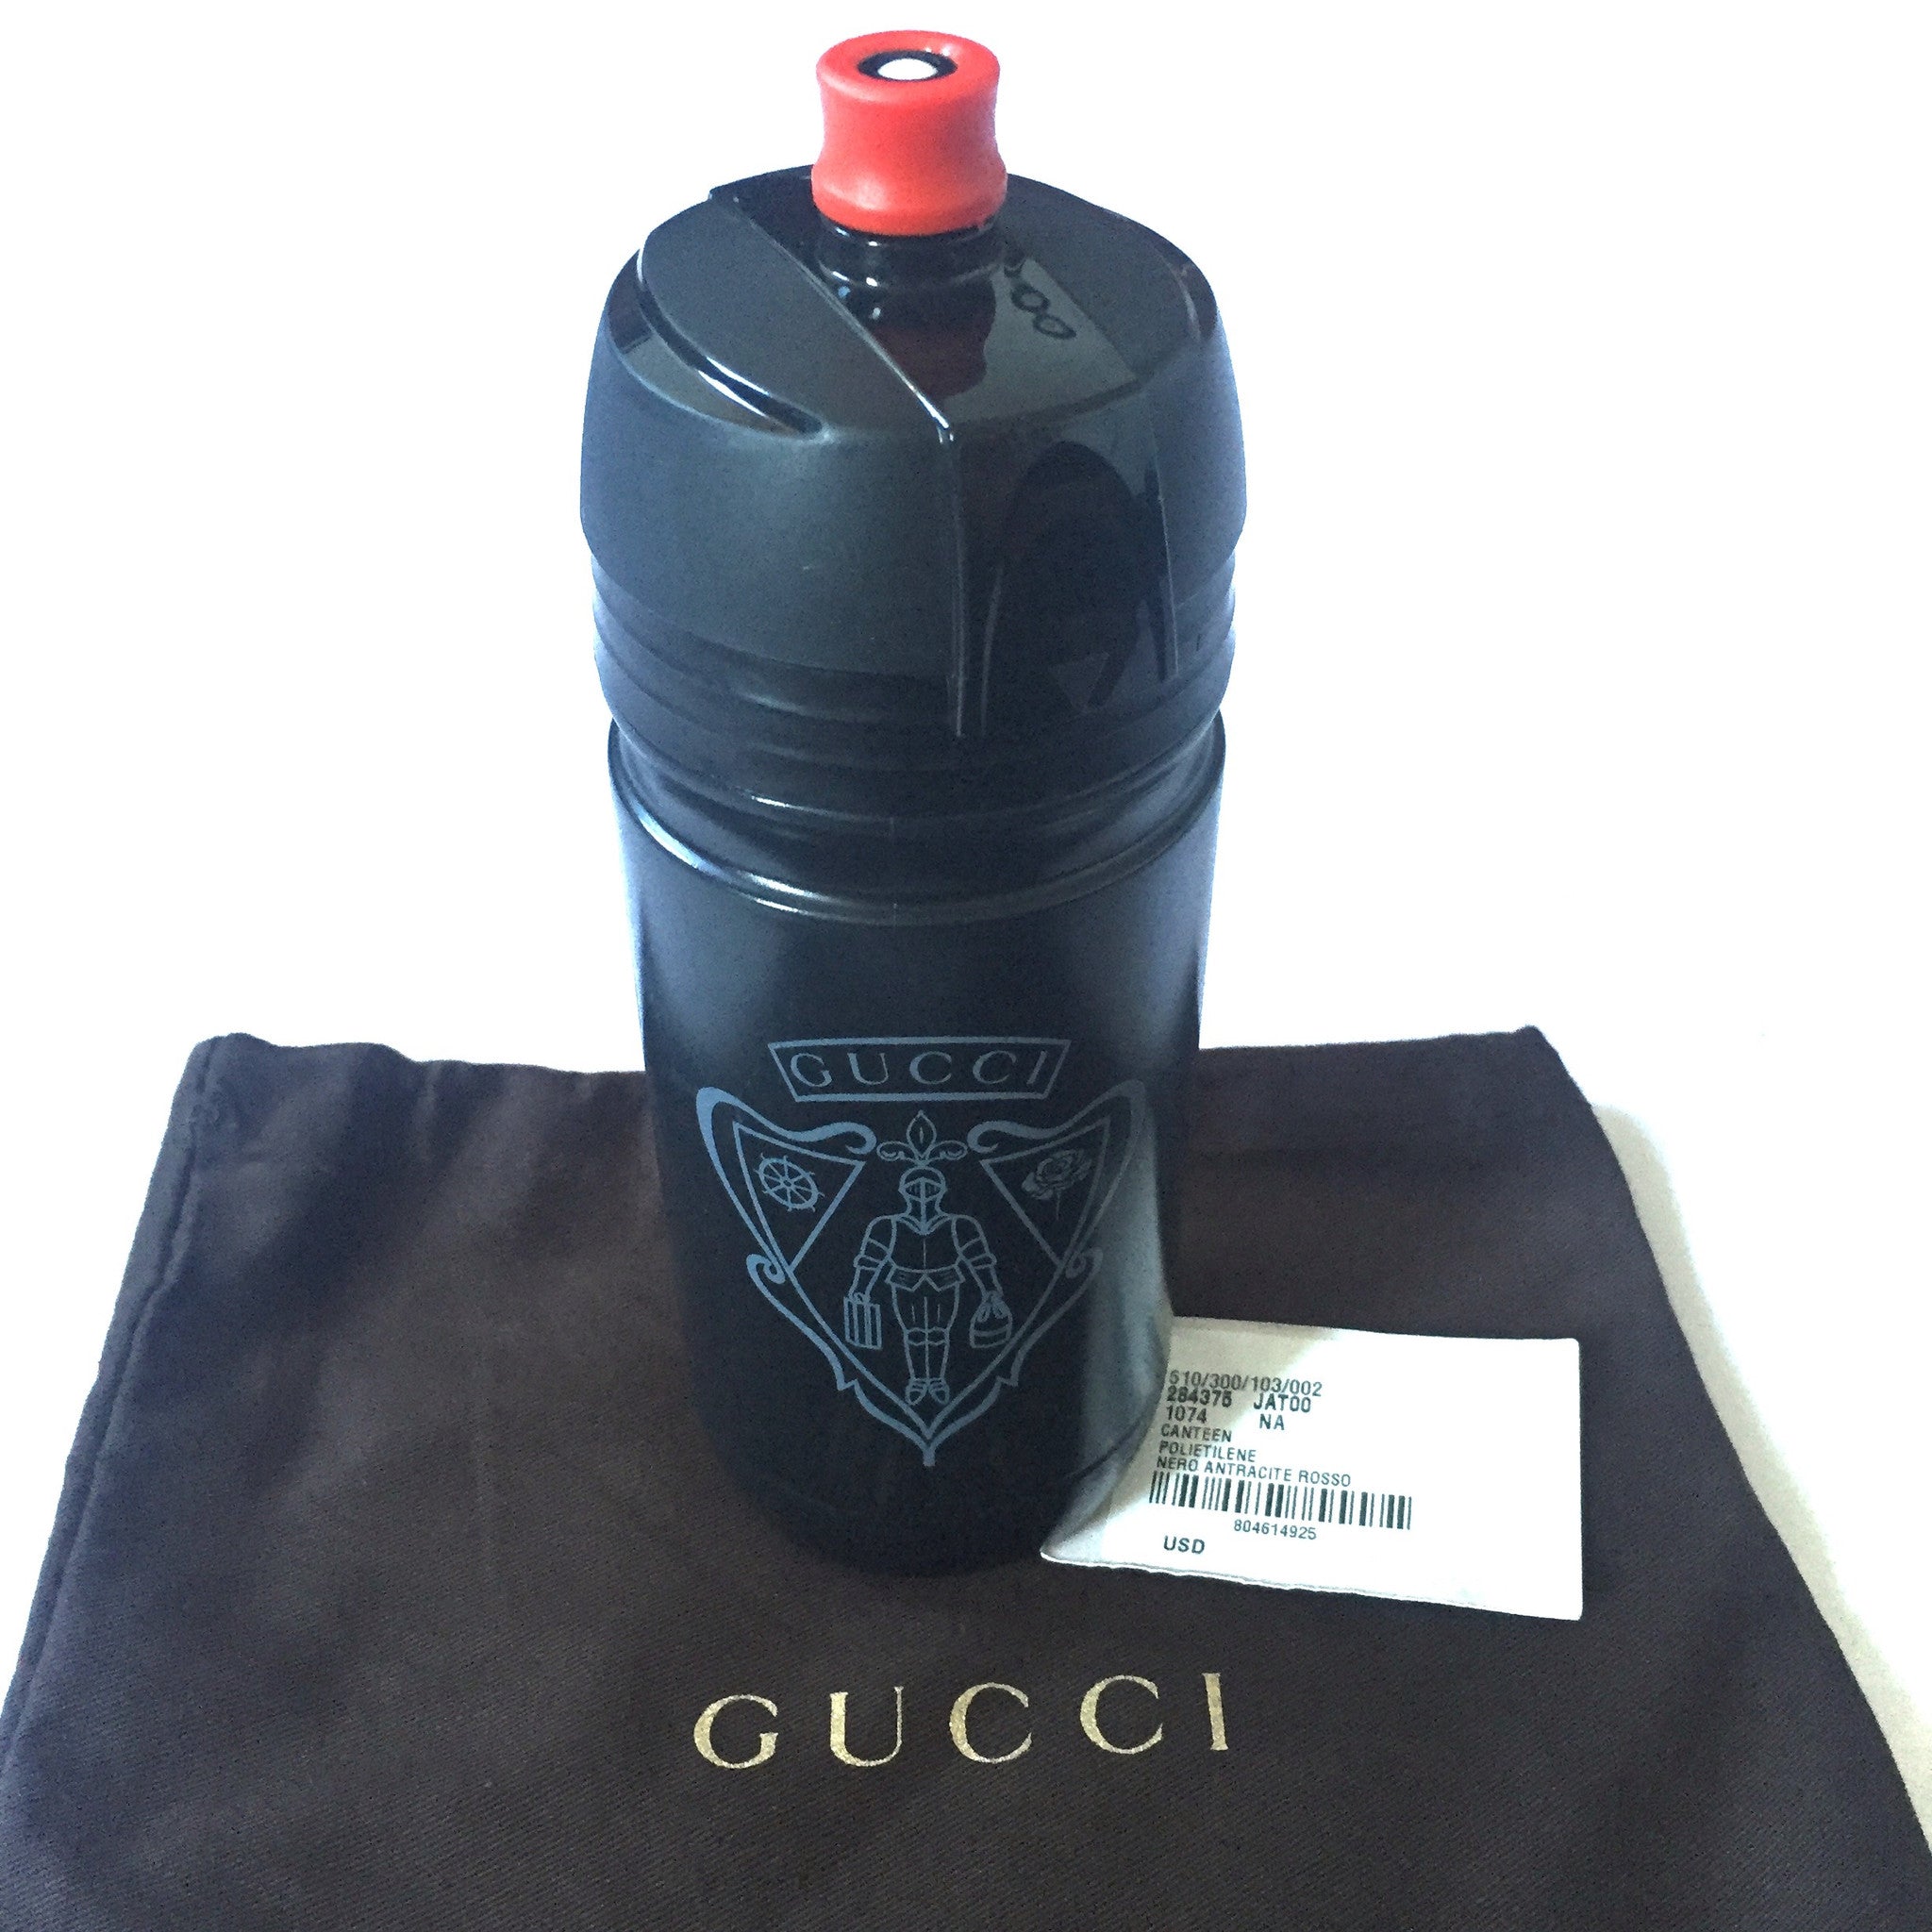 gucci water bottle price